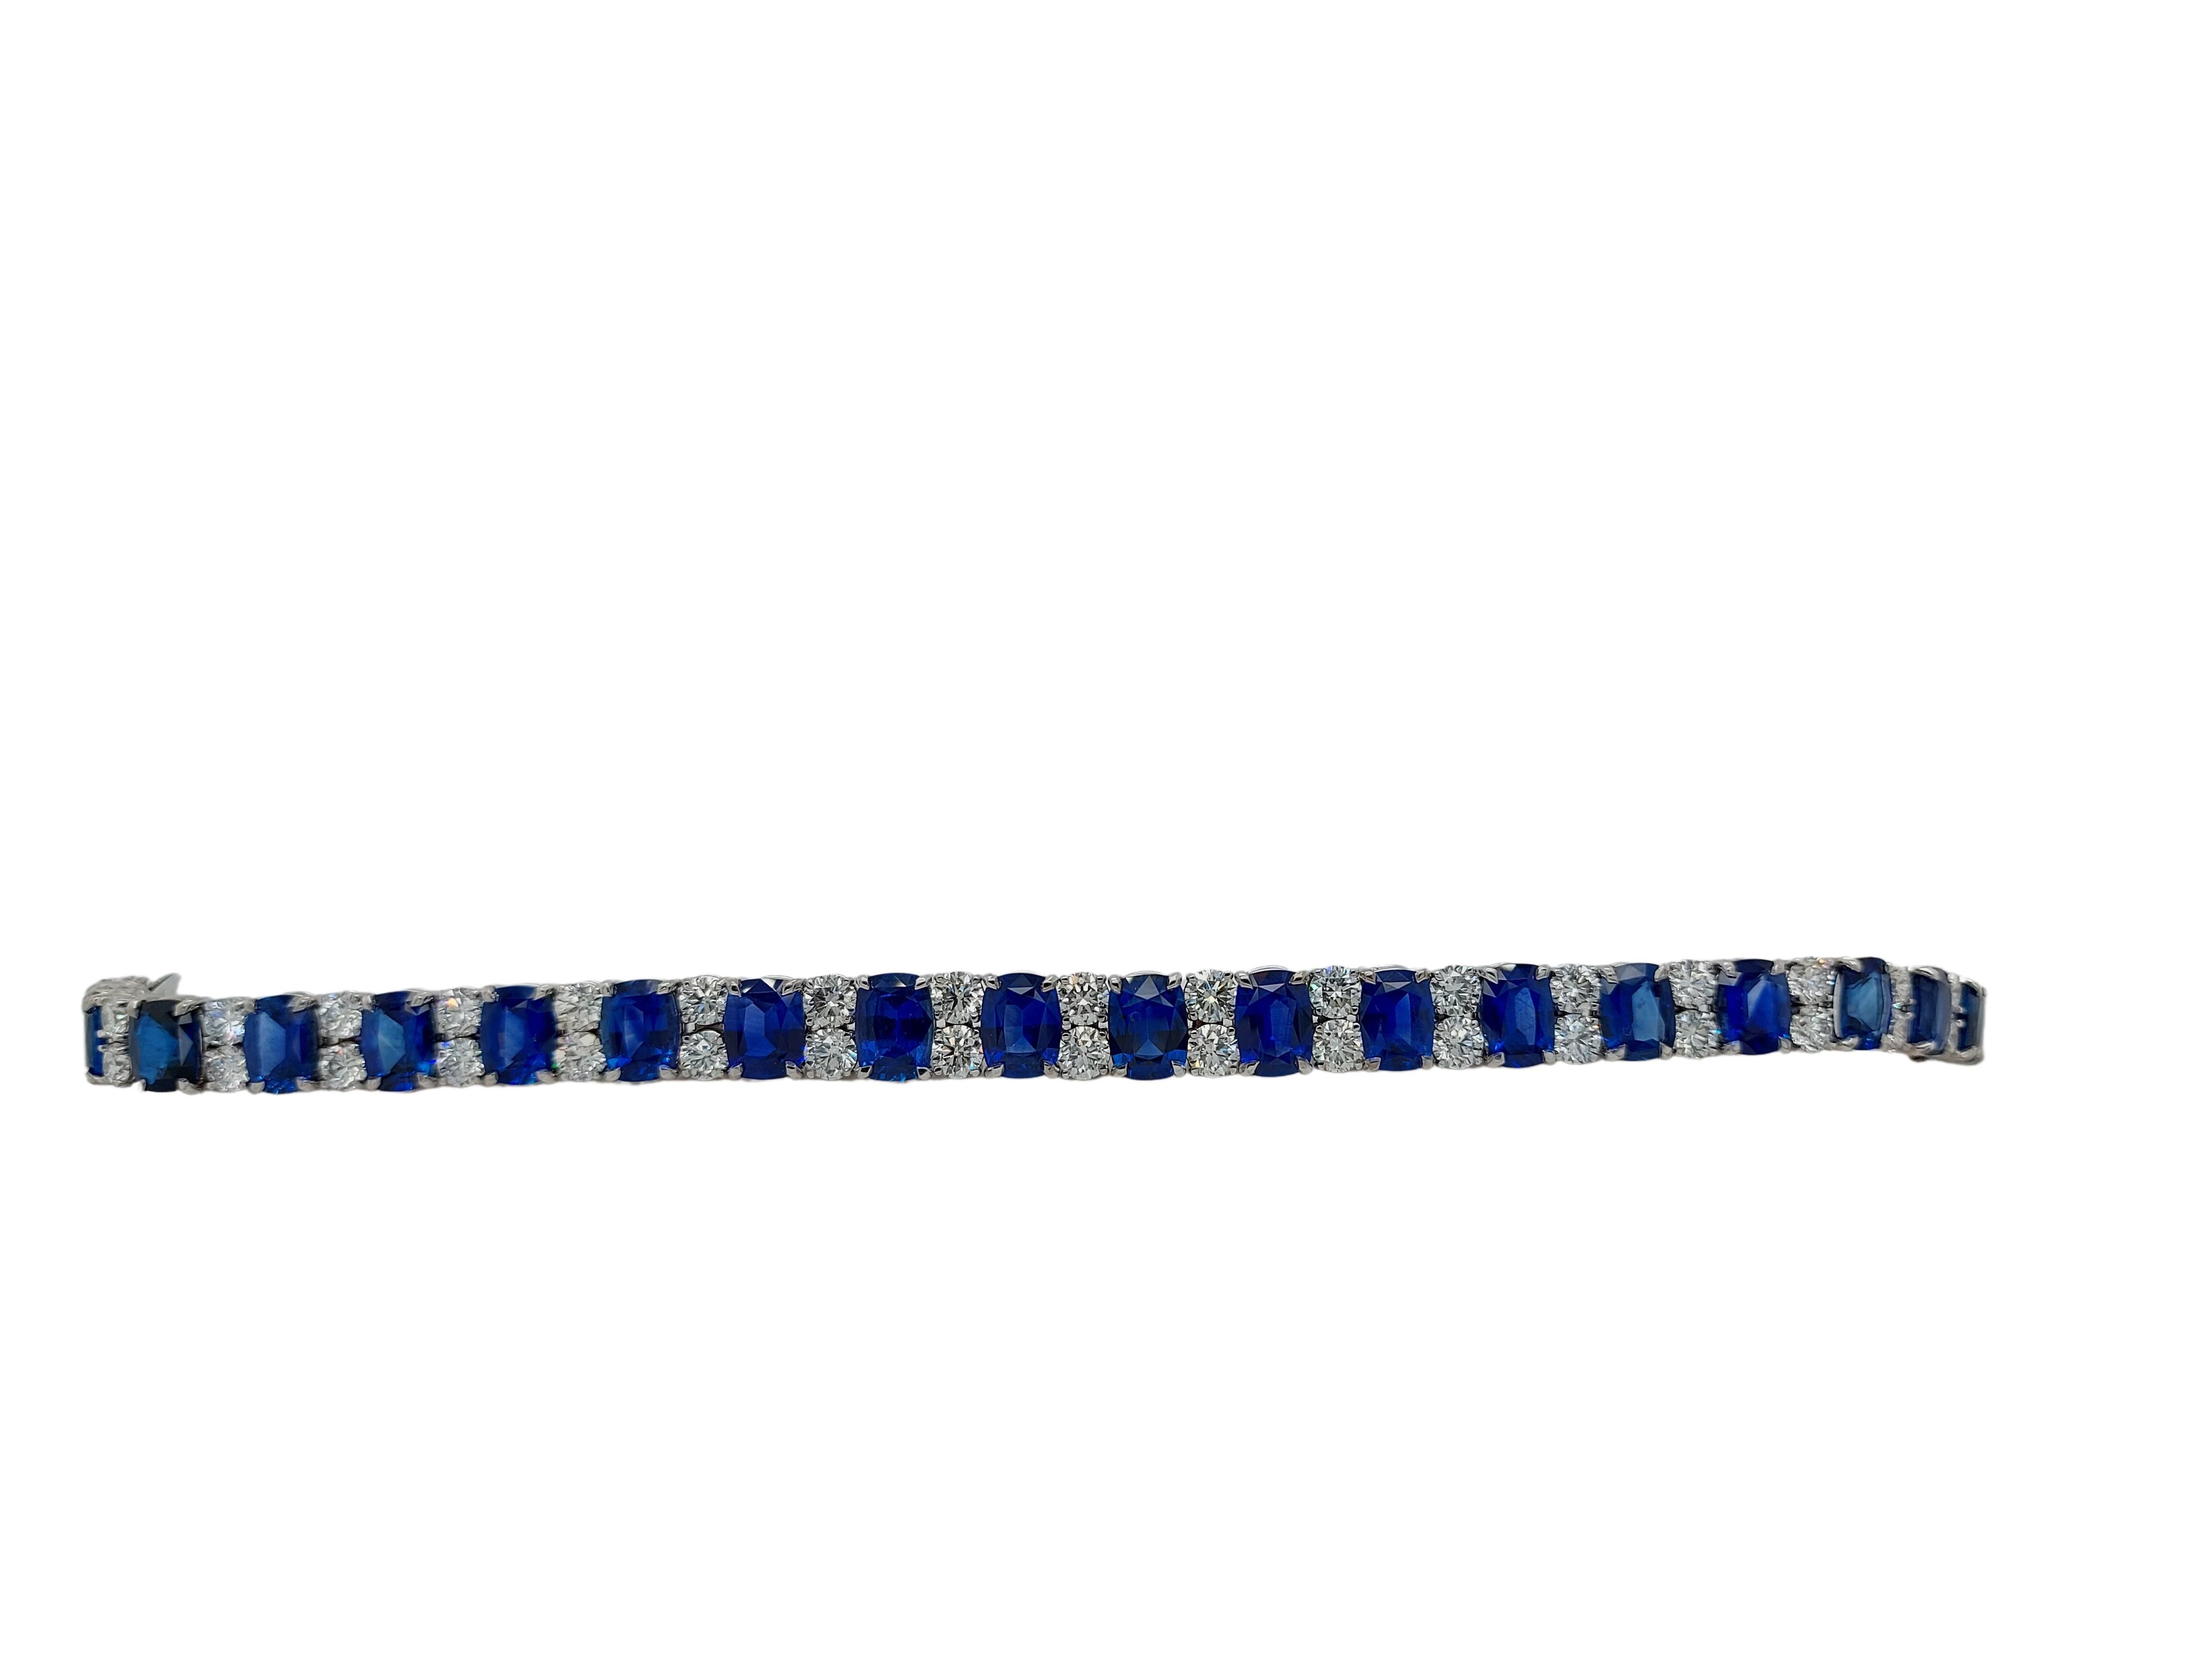 Contemporary 18kt White Gold Bracelet  27.33ct Sapphires, 9ct Diamonds, CGL Certificated For Sale